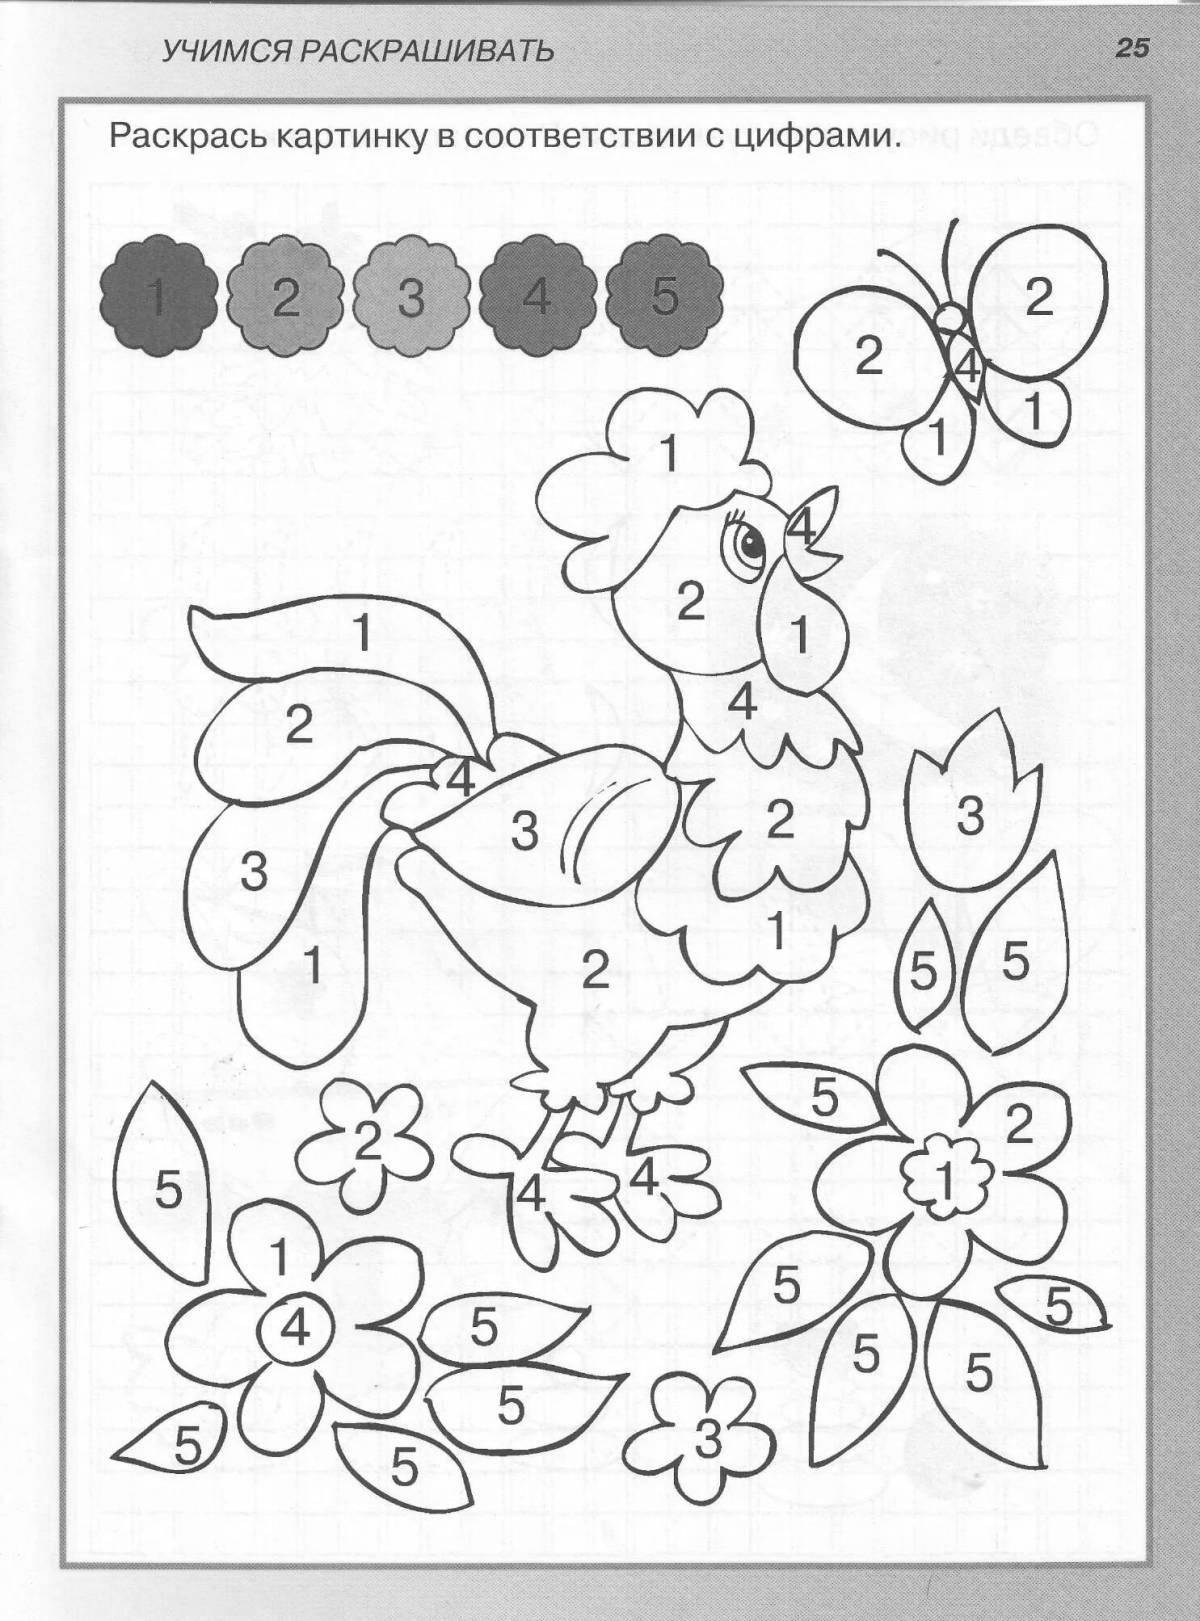 Fun coloring for the development of fine motor skills in children 6-7 years old